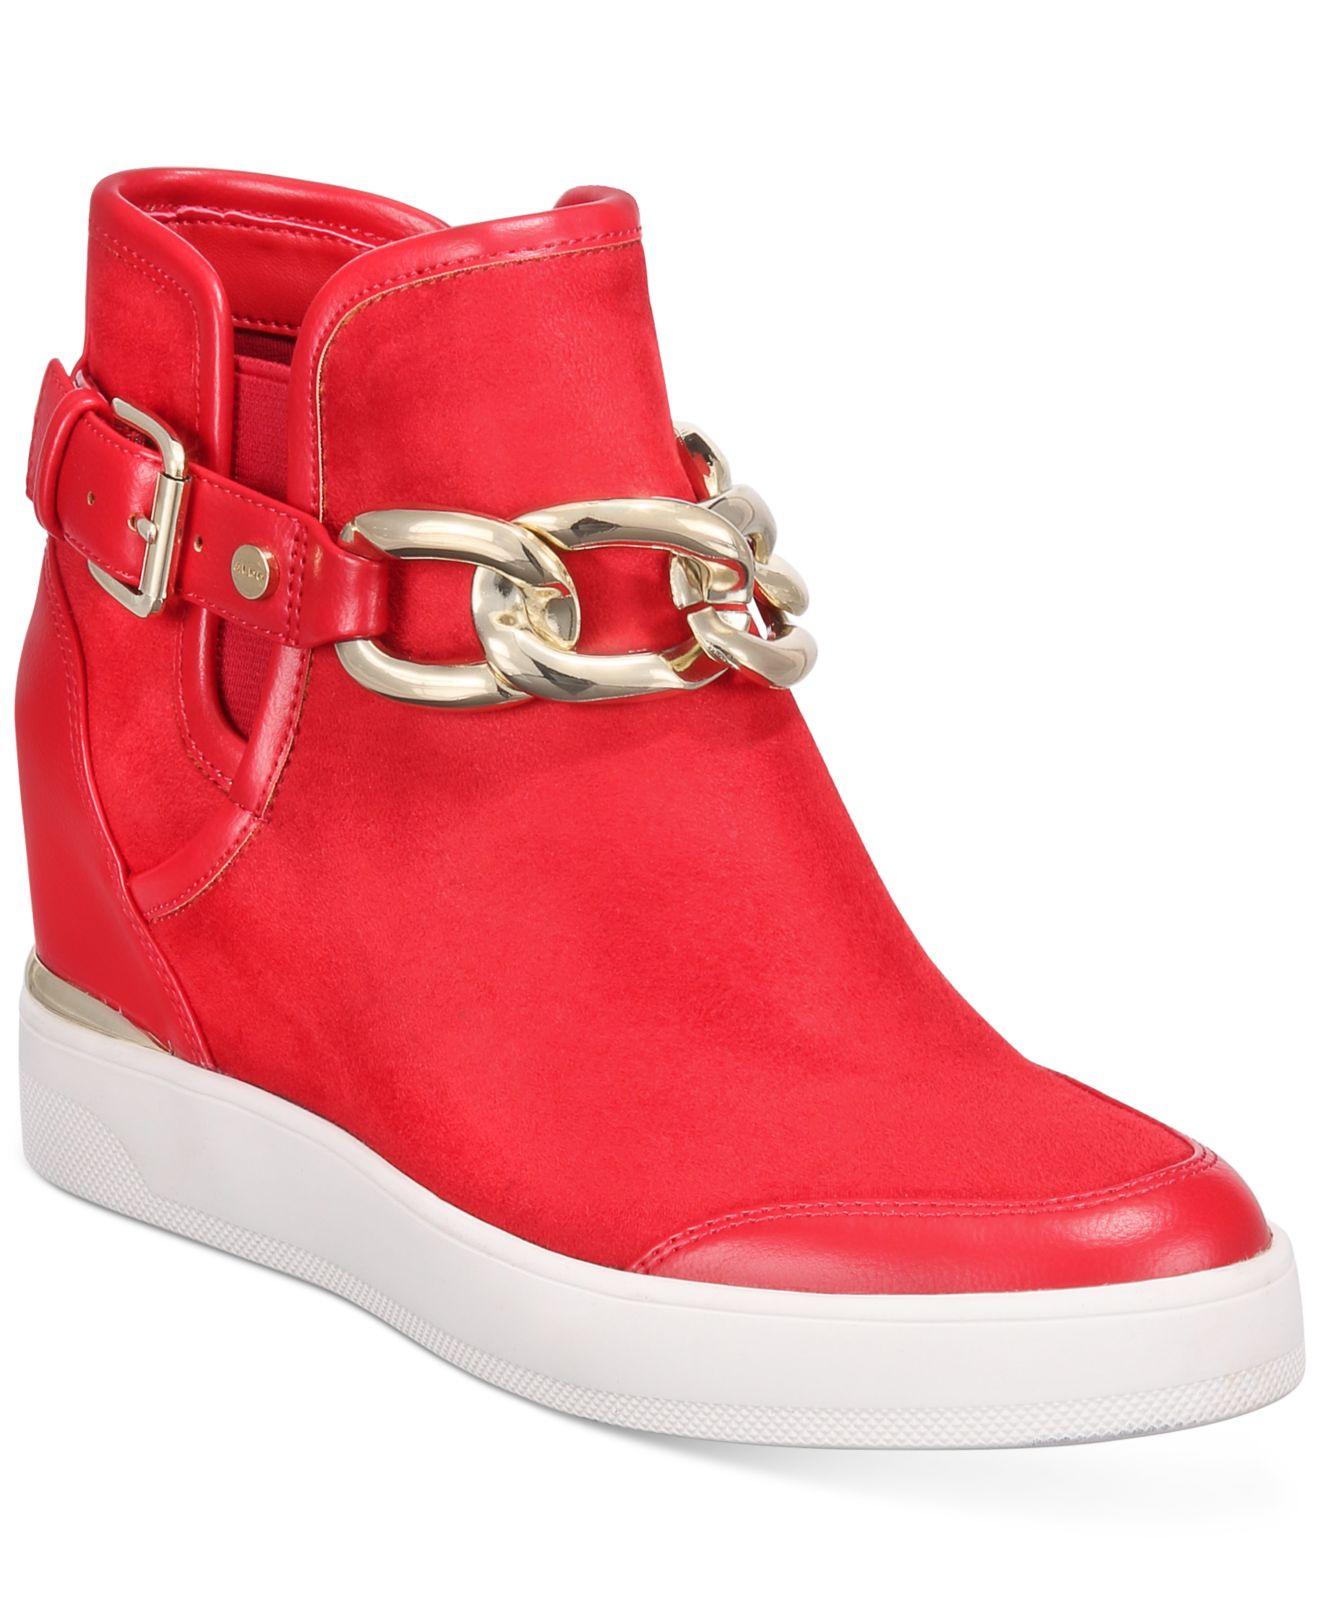 ALDO Cotton Micacea Wedge Sneakers in Red | Lyst